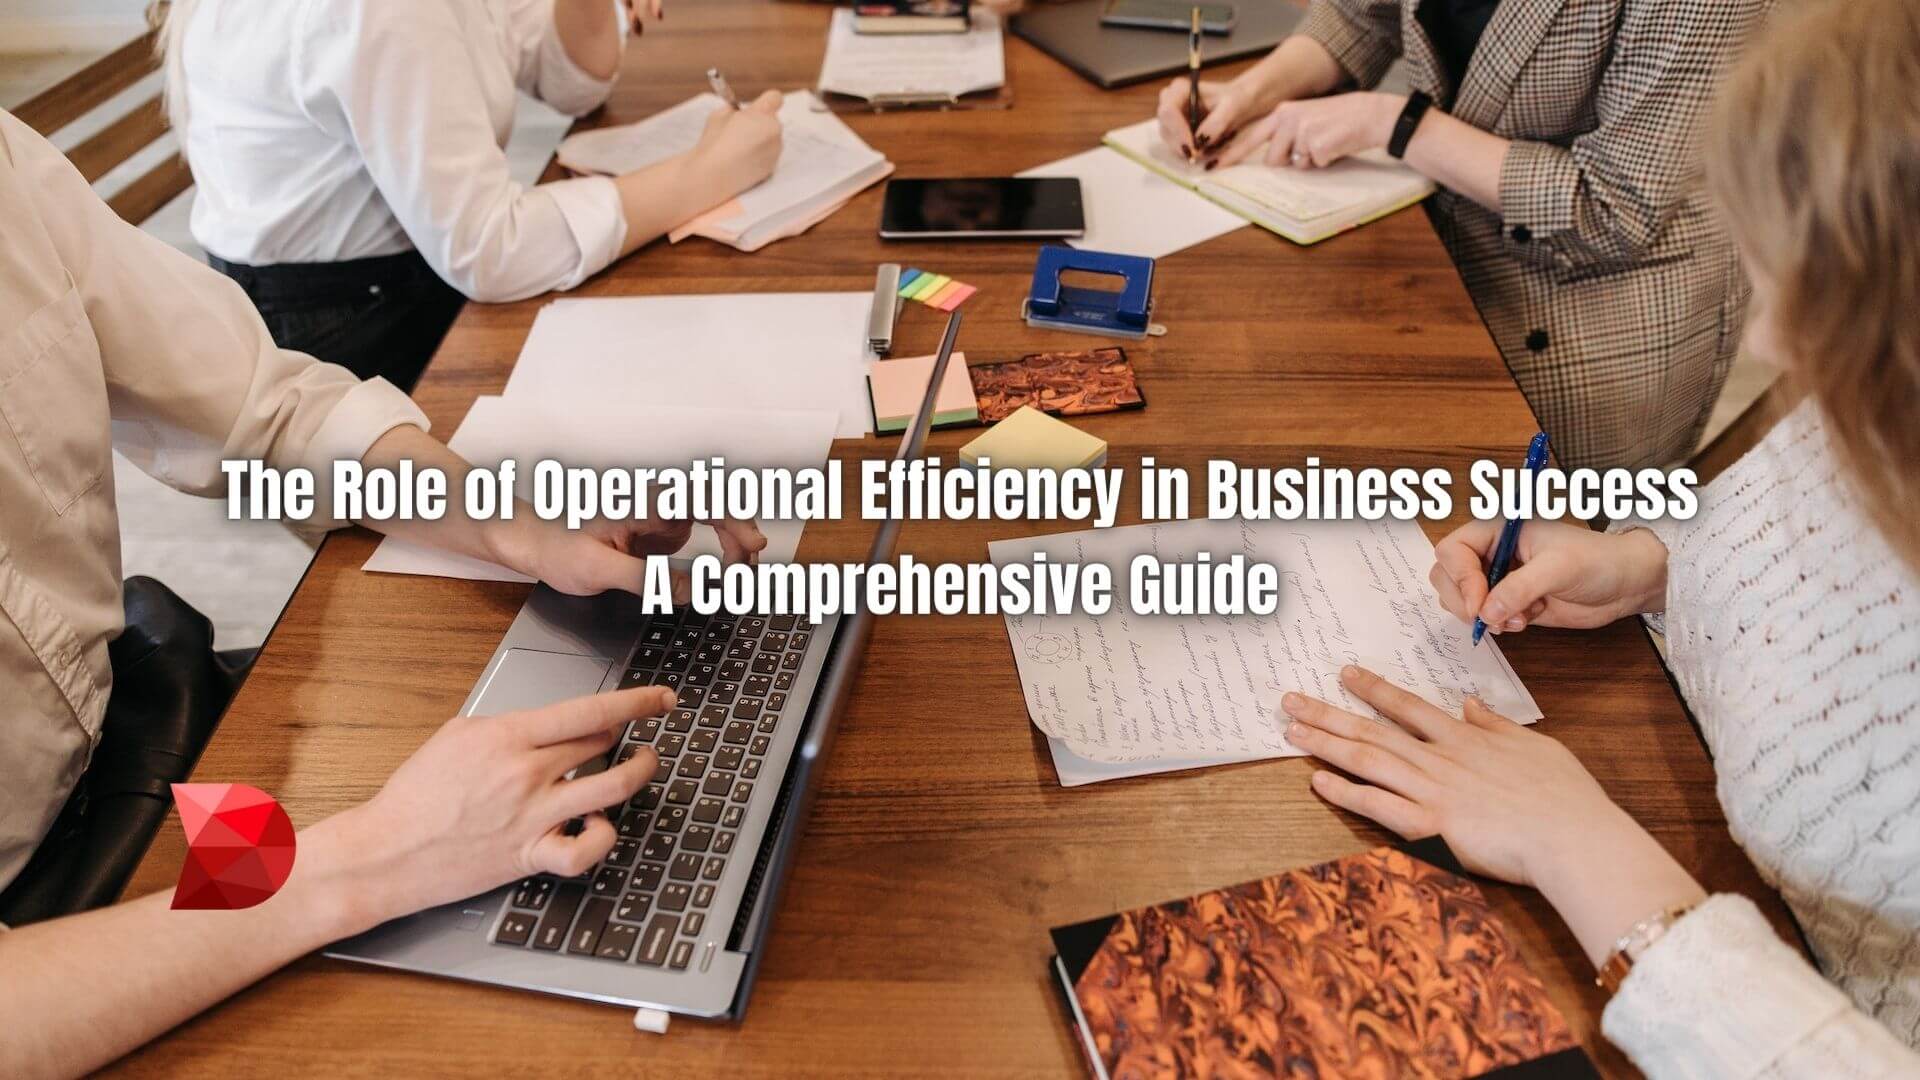 Improving operational efficiency helps organizations become more efficient and productive while achieving greater profitability. Learn how!